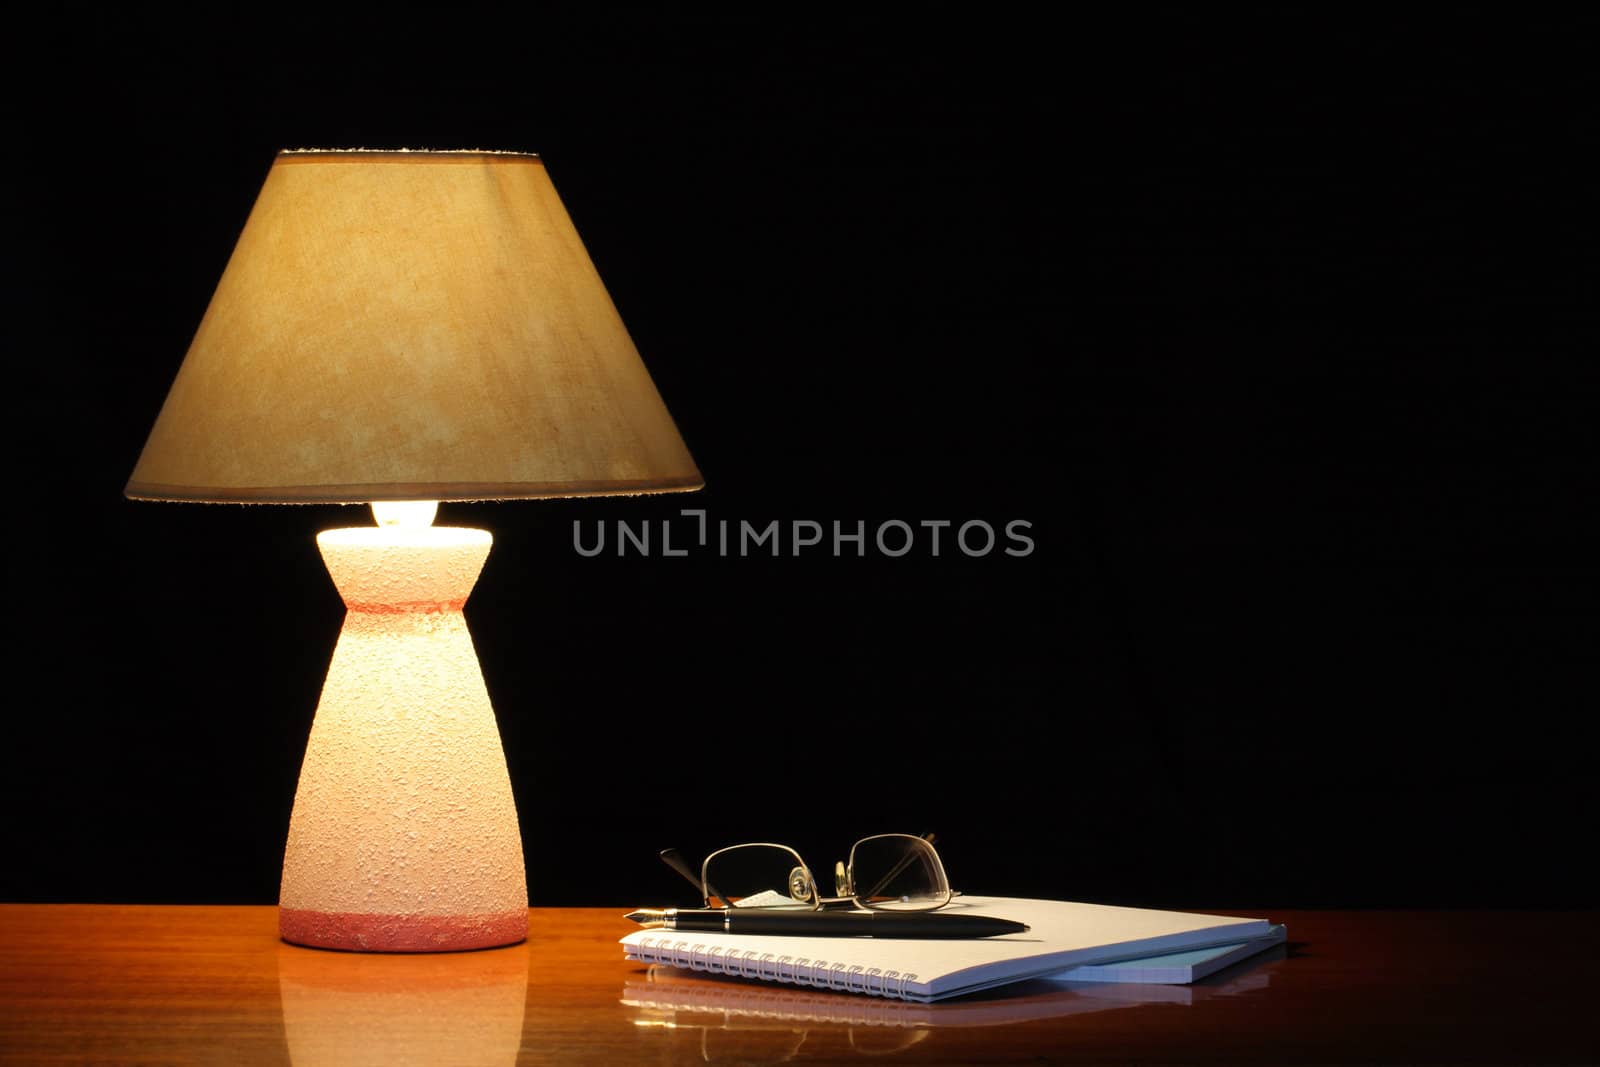 Vintage table lamp with shade near open spiral notebook on dark background